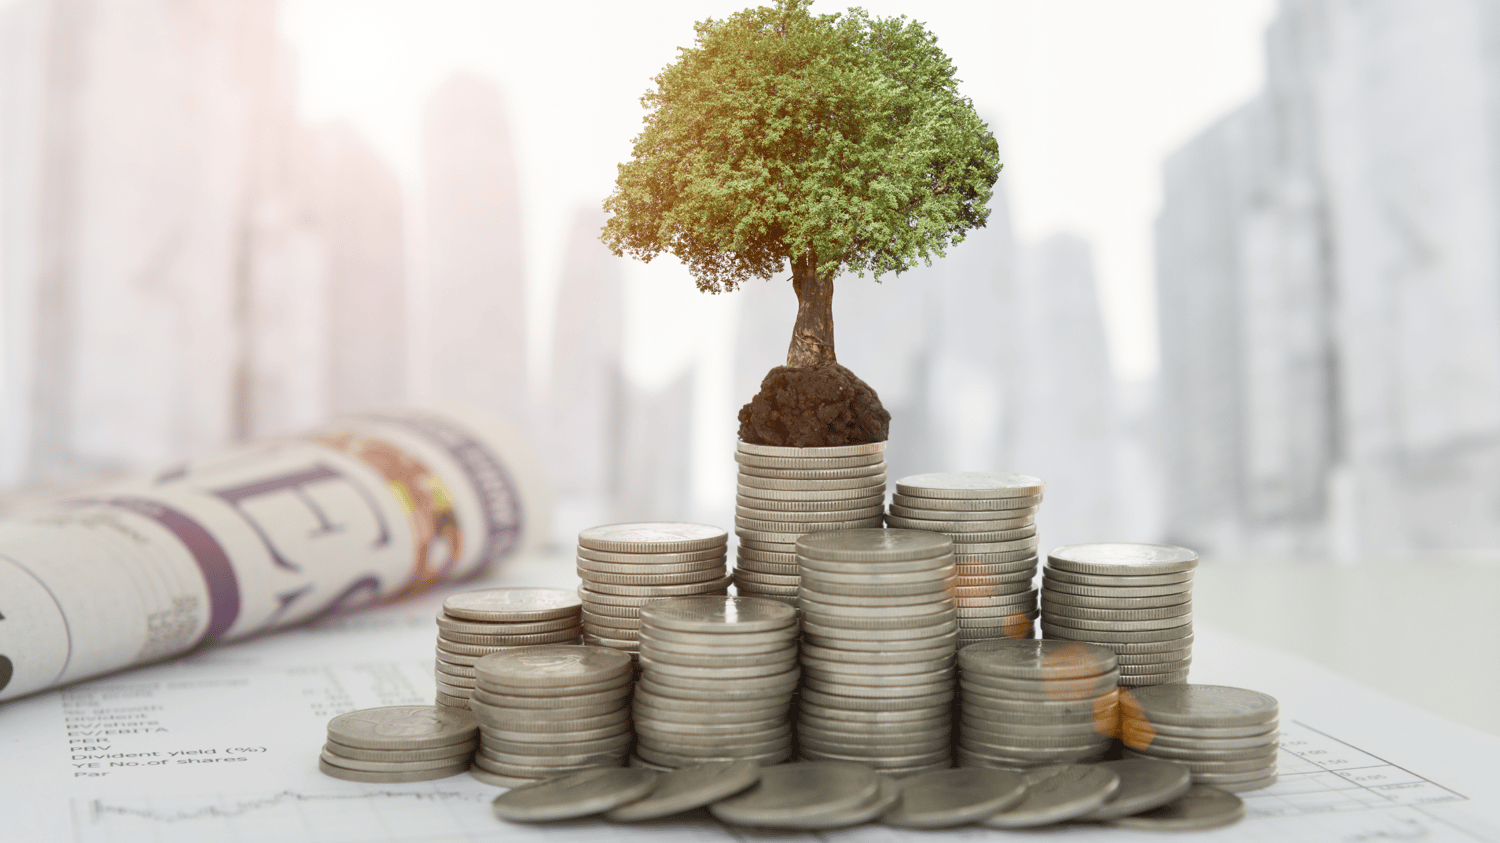 SMALL INVESTMENTS, BIG REWARDS - THE BENEFITS OF MICROINVESTING WITH ACORNS